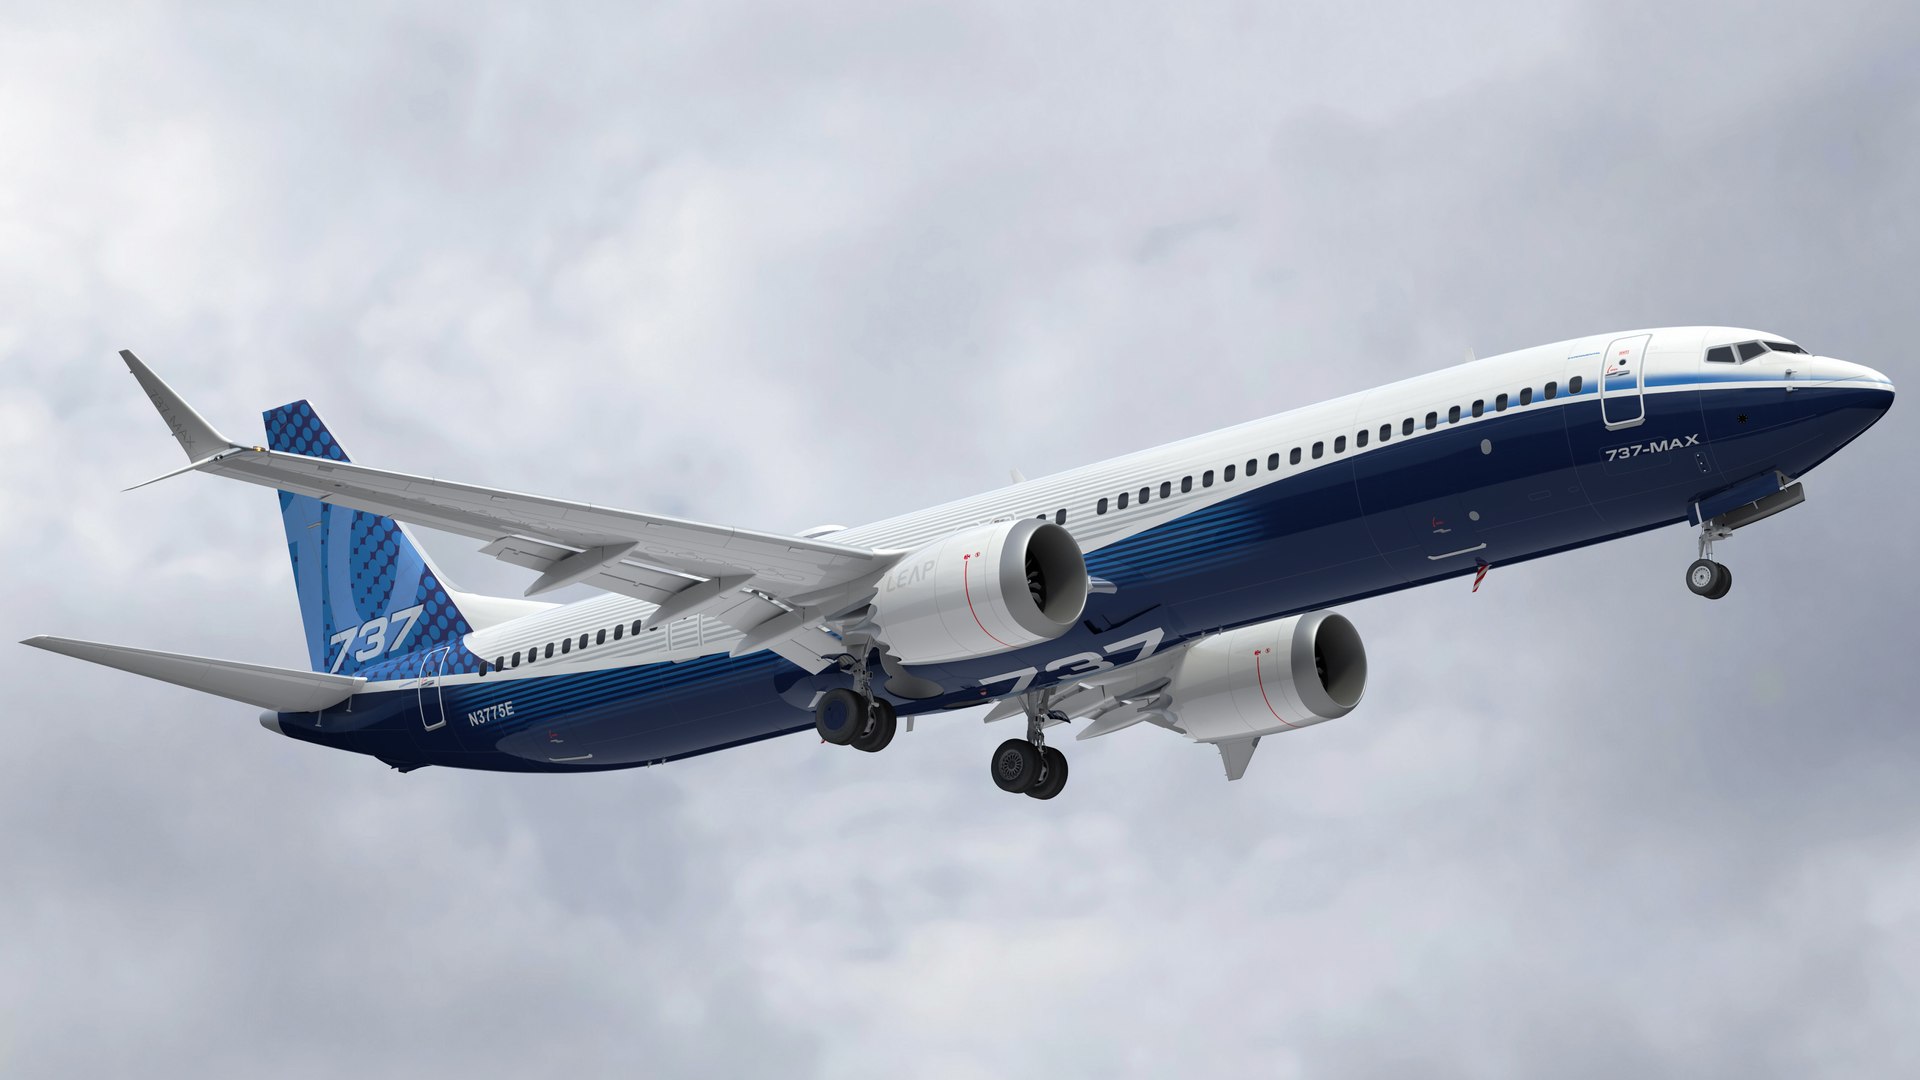 Boeing 737-10 MAX with Animation 3D model - TurboSquid 2163213